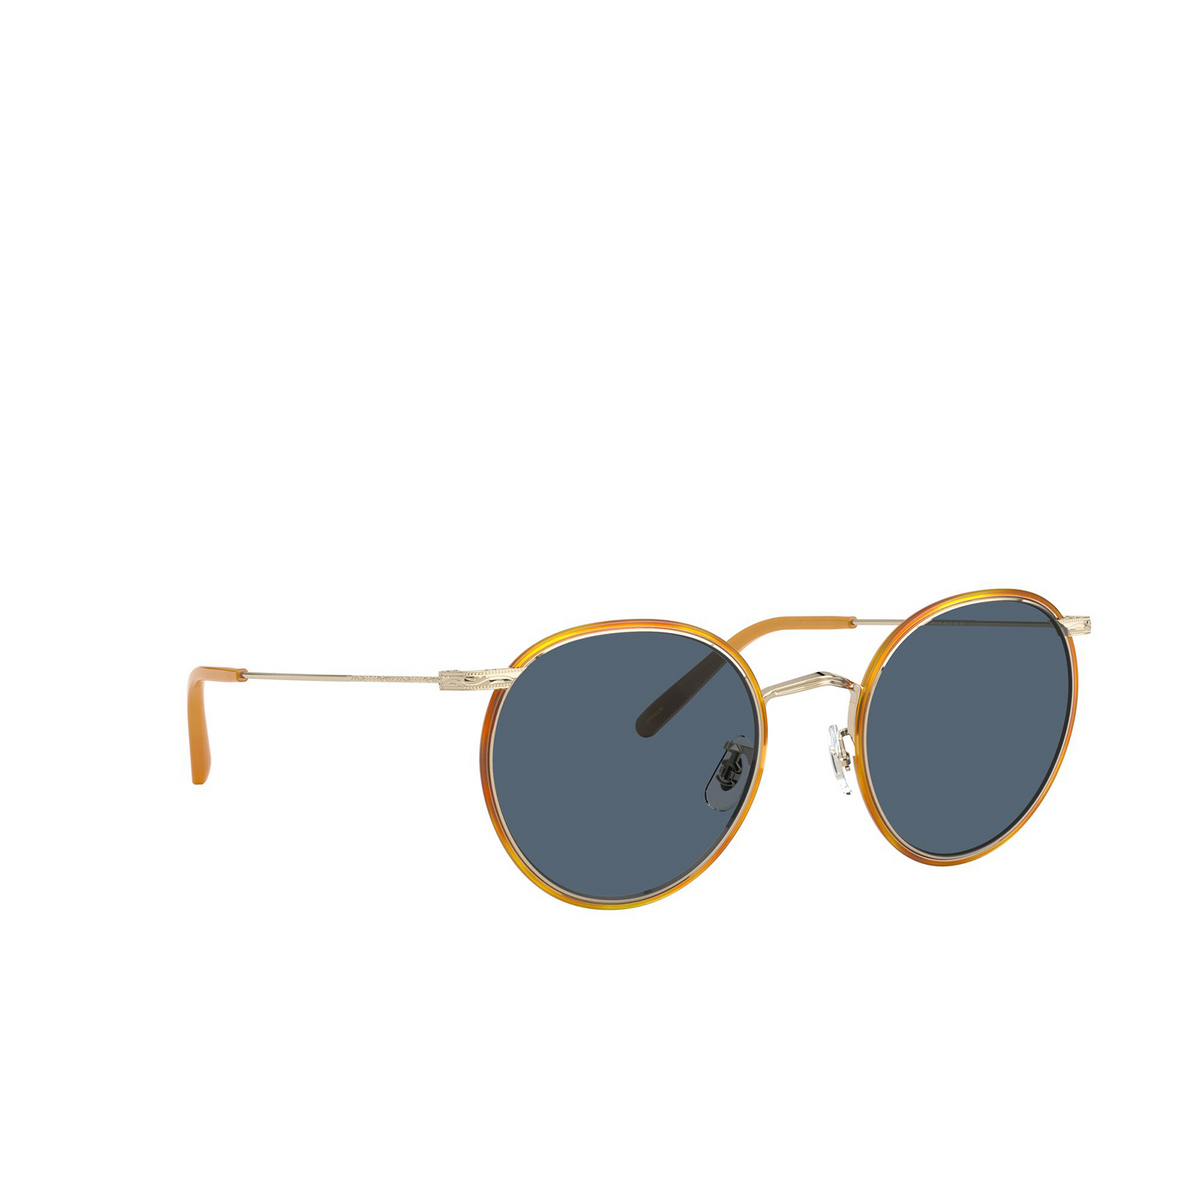 Oliver Peoples® Round Sunglasses: Casson OV1269ST color Soft Gold / Amber 503556 - three-quarters view.